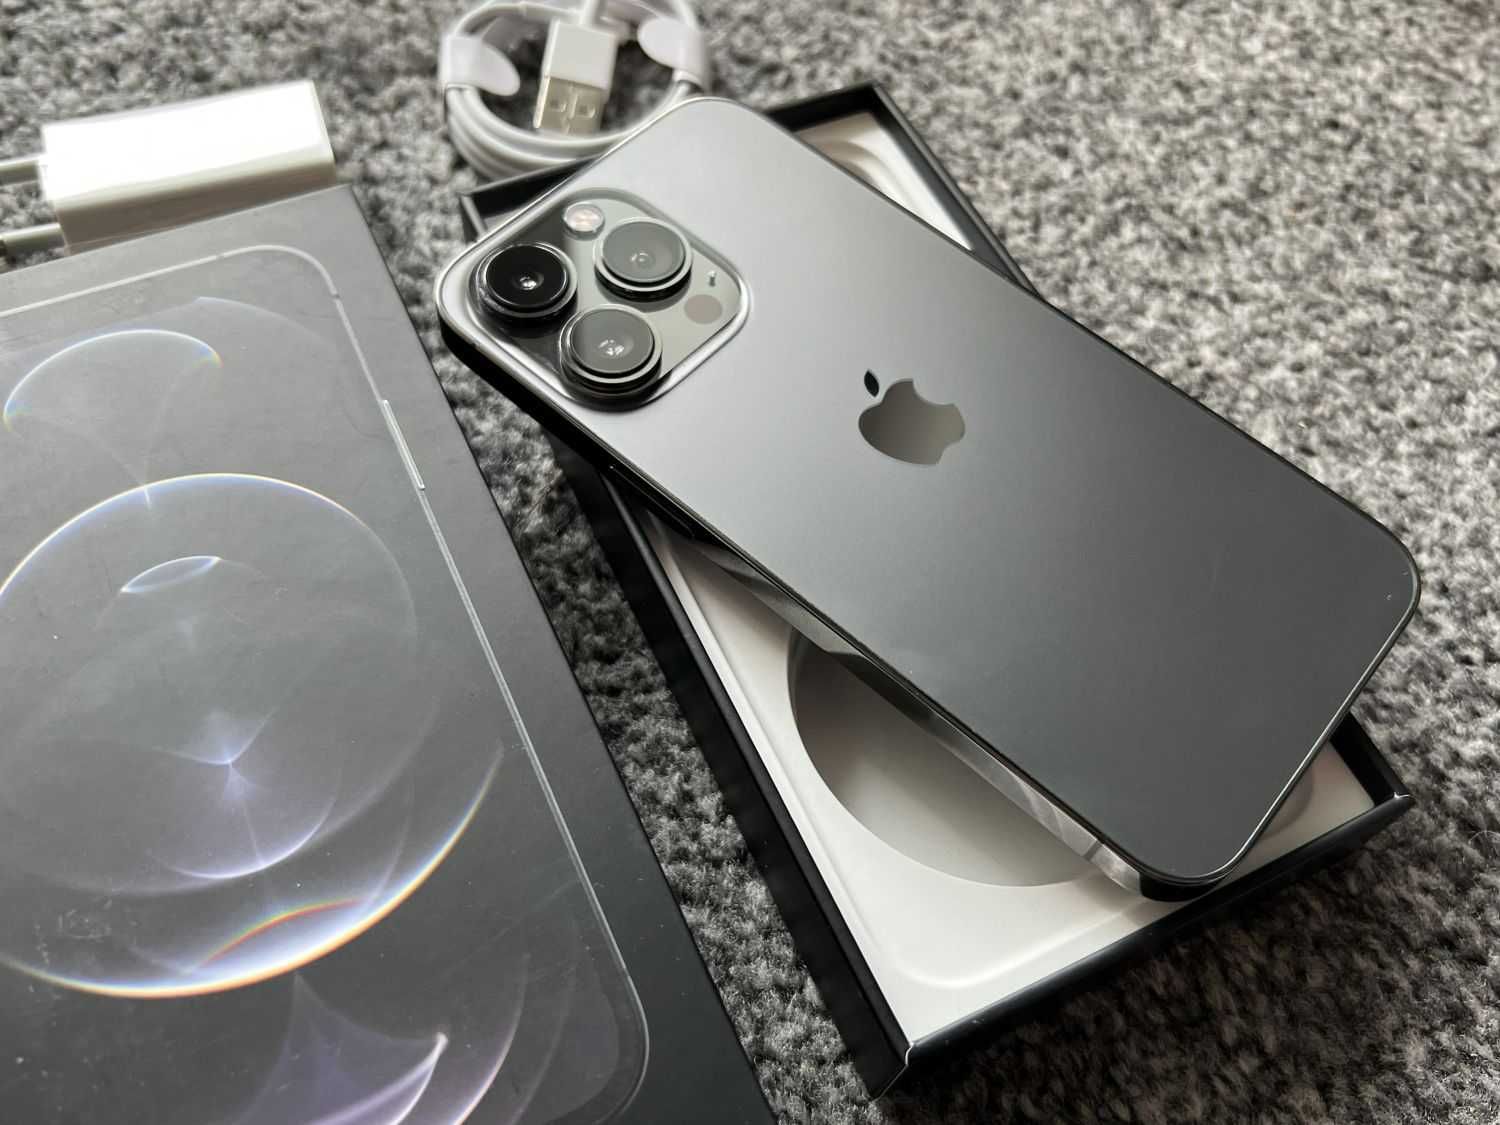 iPhone 13 Pro 128GB SPACE GREY Szary Grafitowy Bateria 98% FV23%Brutto